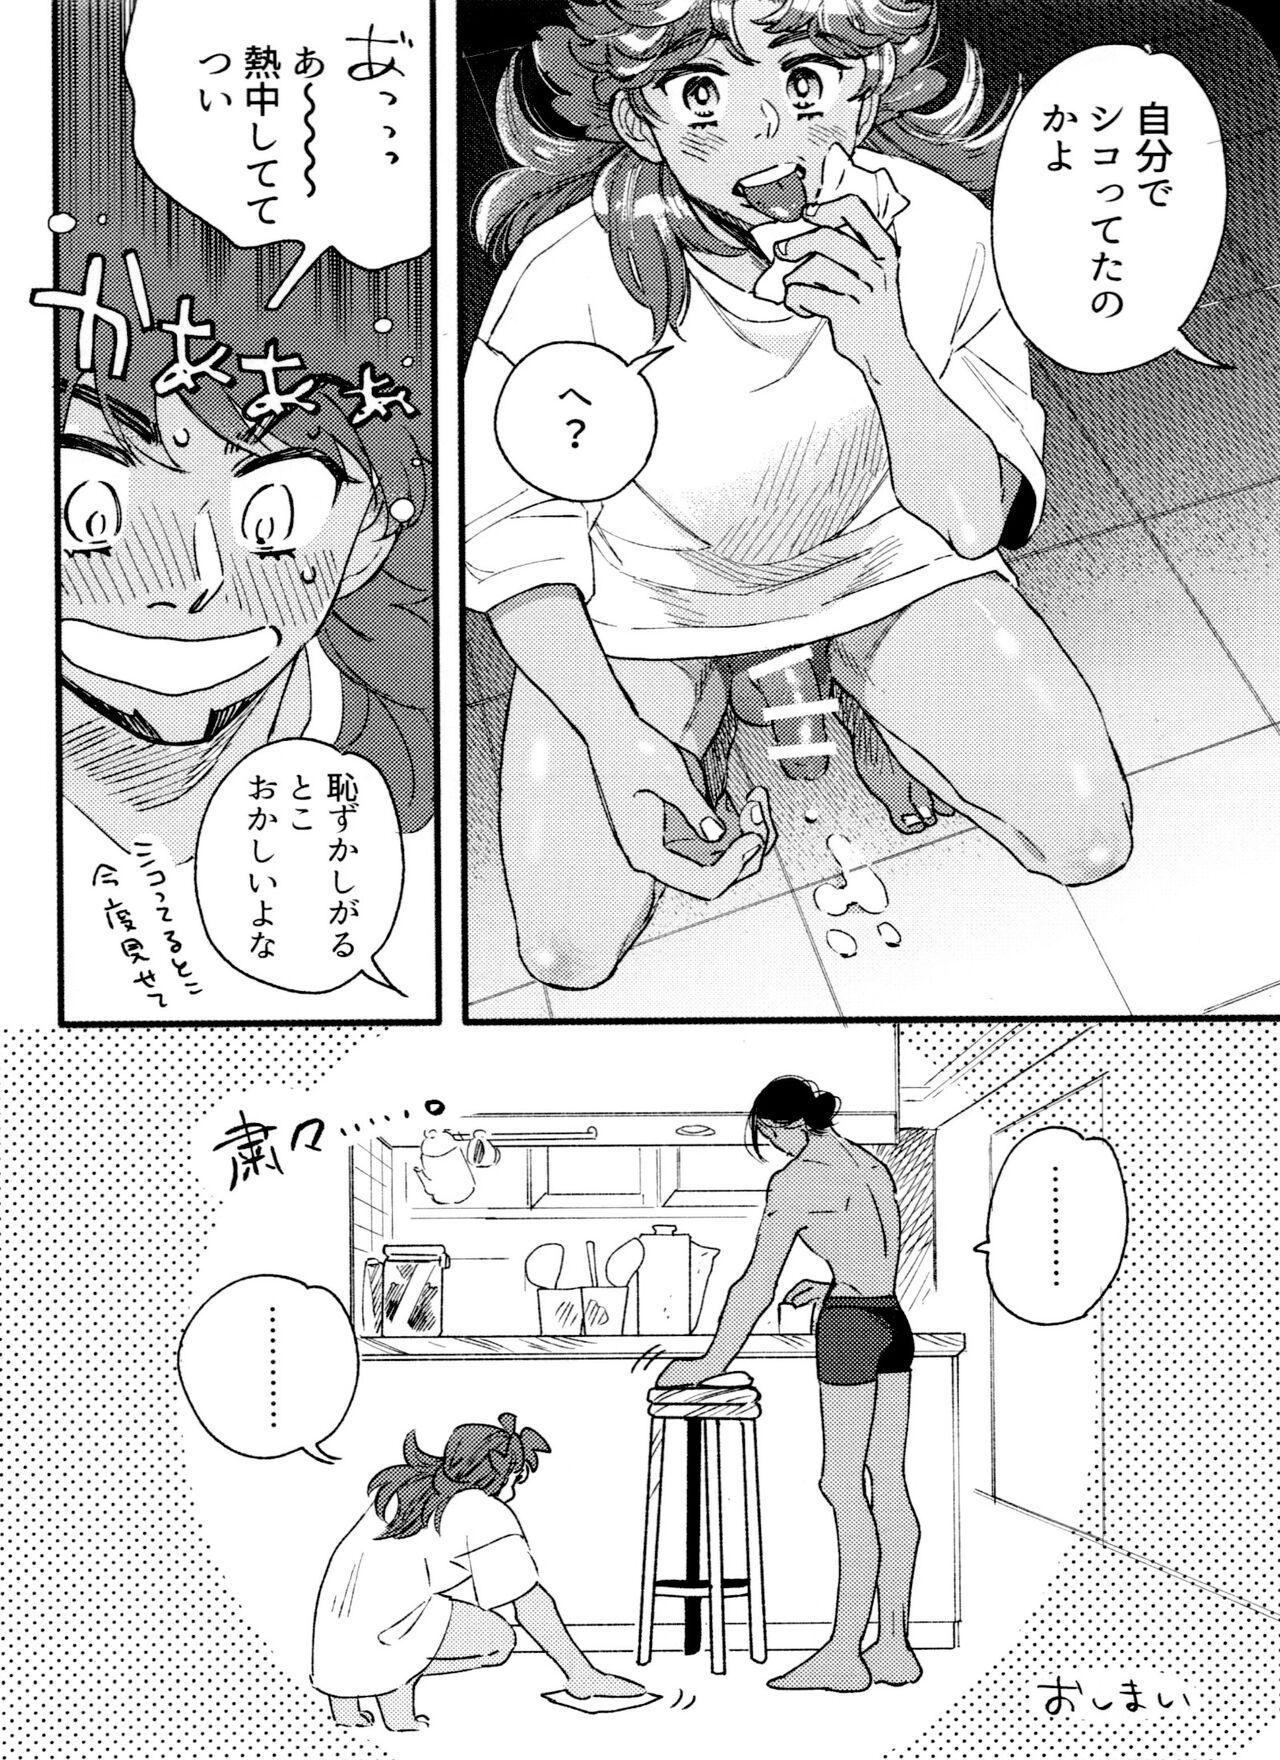 Adorable Midnight Nude Noodle - Pokemon | pocket monsters Club - Page 26